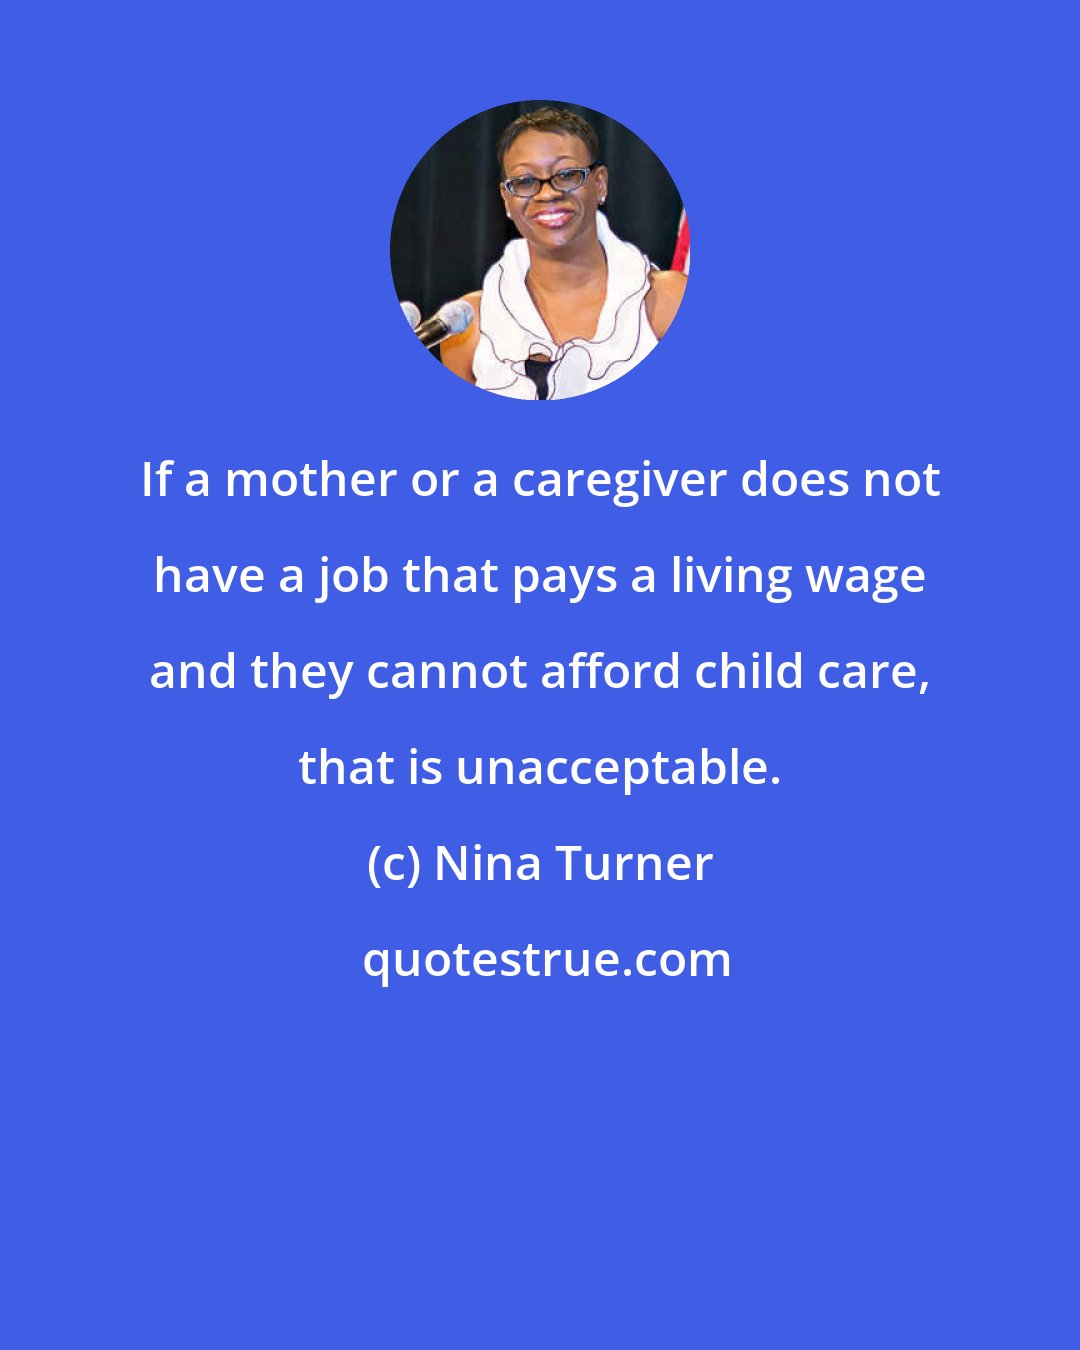 Nina Turner: If a mother or a caregiver does not have a job that pays a living wage and they cannot afford child care, that is unacceptable.